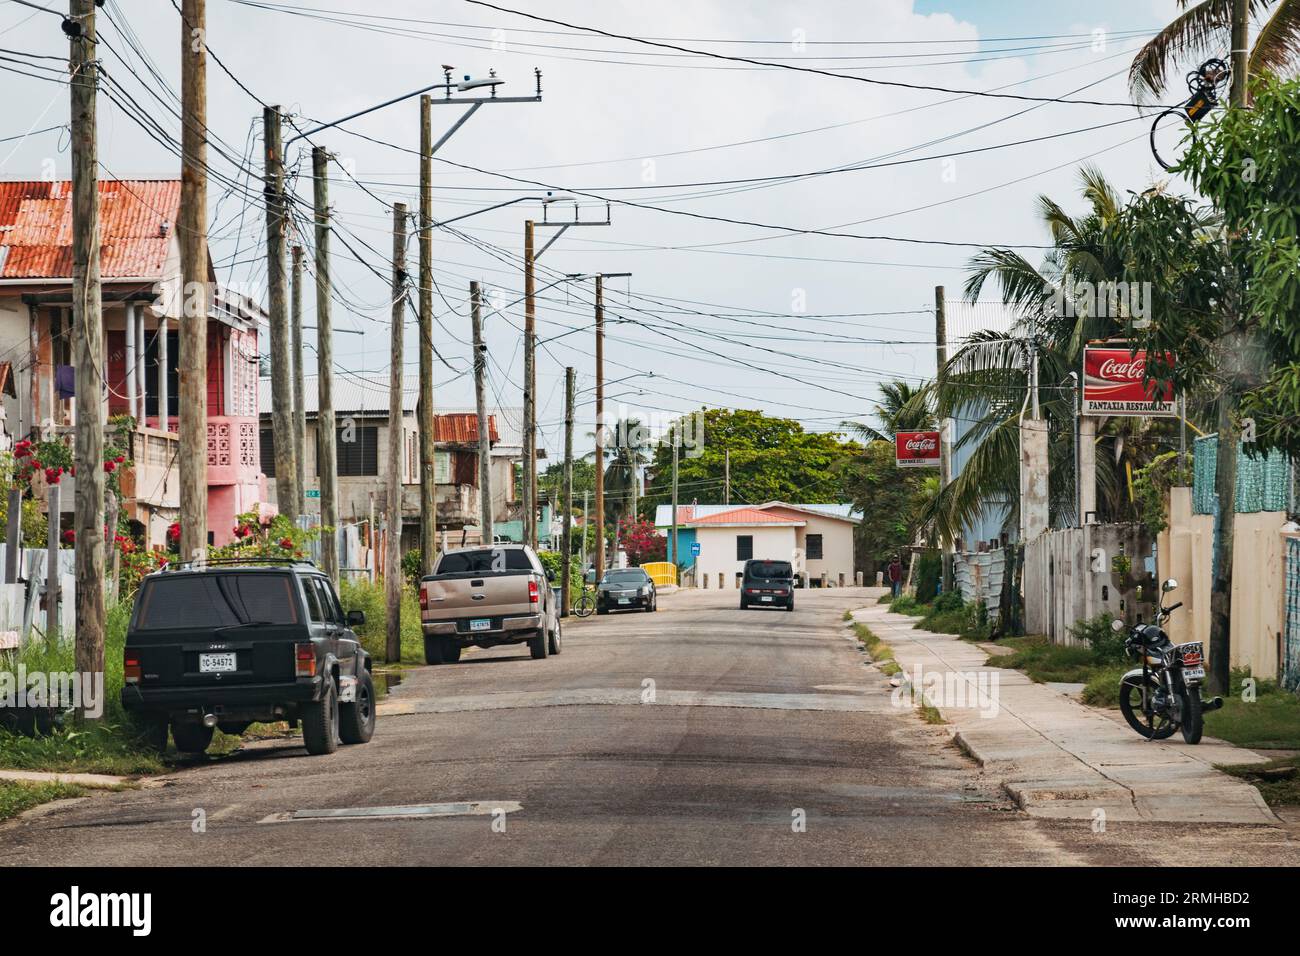 a quiet, empty suburban street in Belize City, Belize. Shops have Coca-Cola signs mounted out front Stock Photo